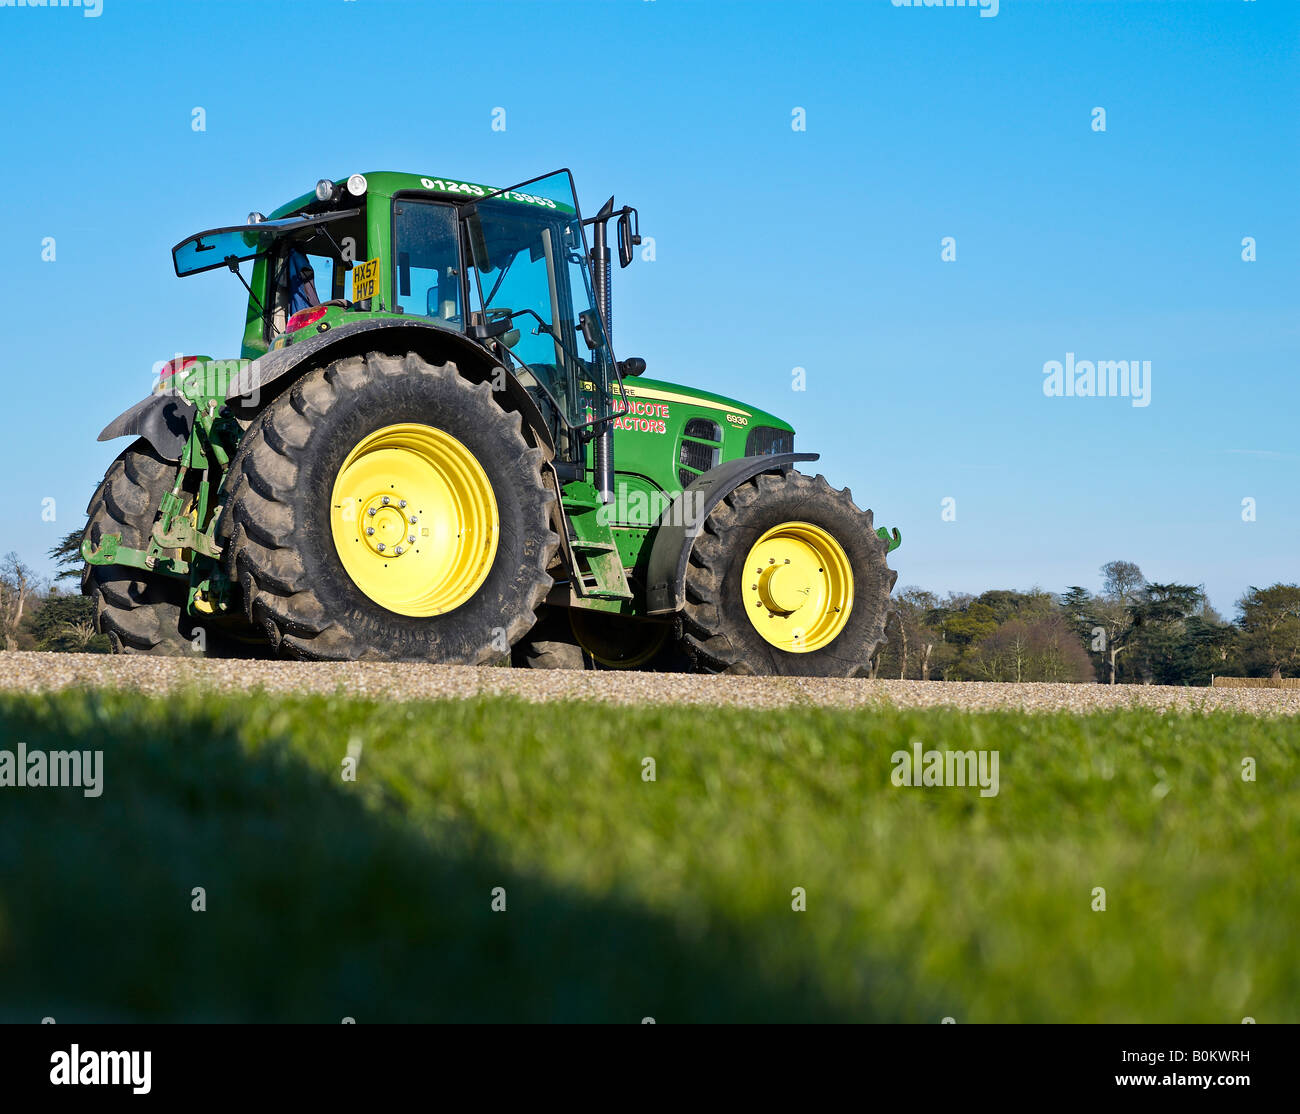 Green and yellow John Deere tractor under blue sky Stock Photo - Alamy